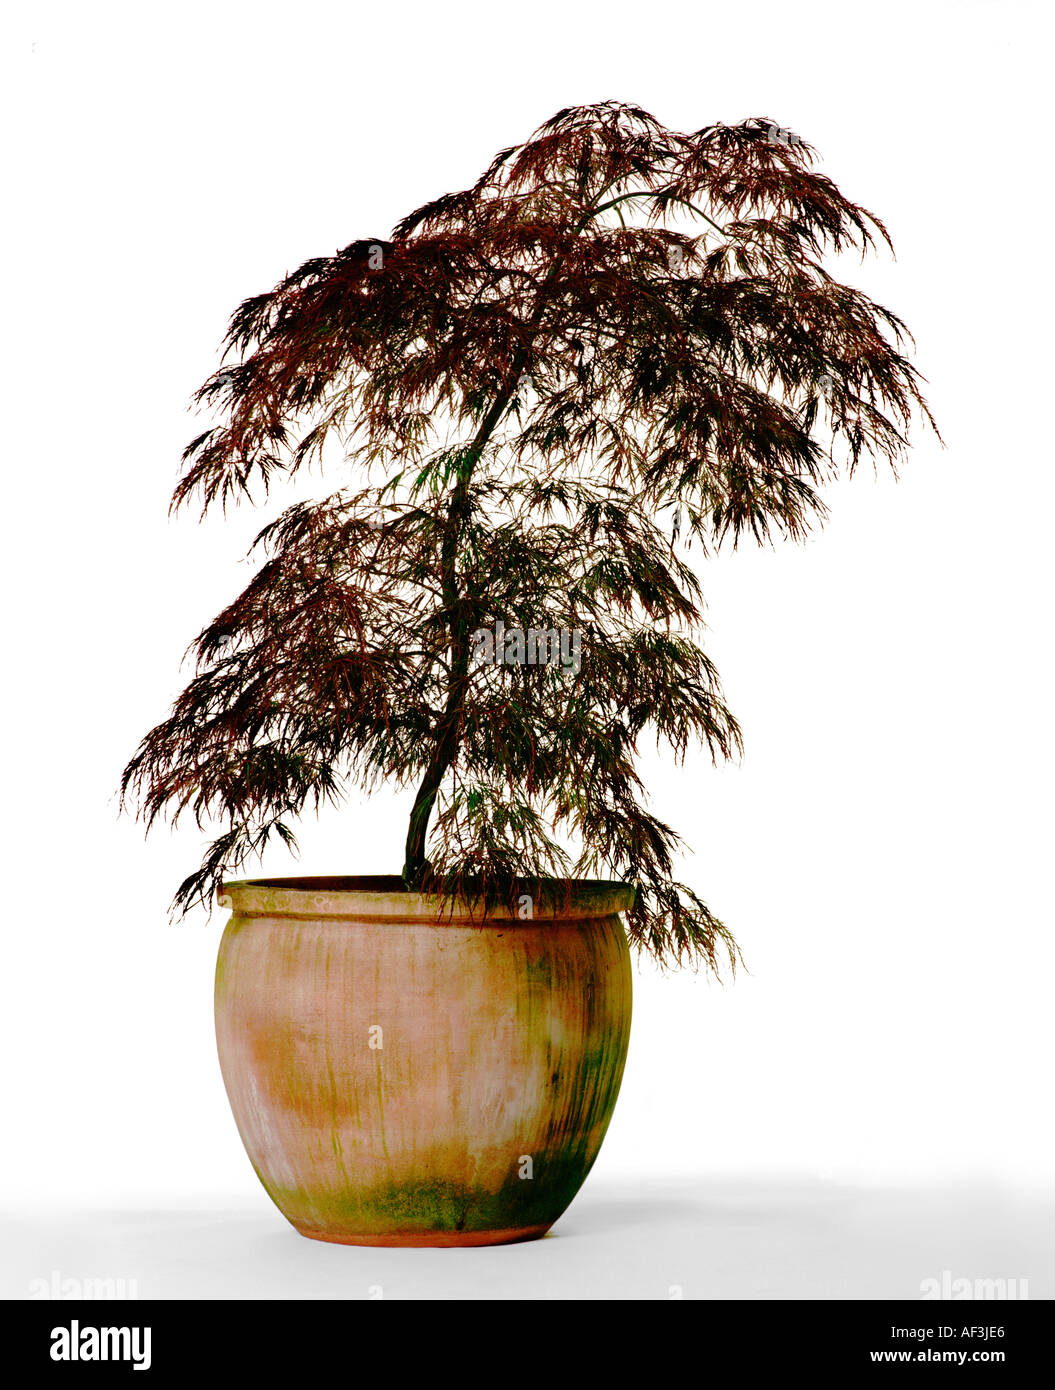 A Japanese maple tree,  Acer palmatum disectum, in an earthenware pot. These trees prefer acid soil and calcium-free water. Stock Photo